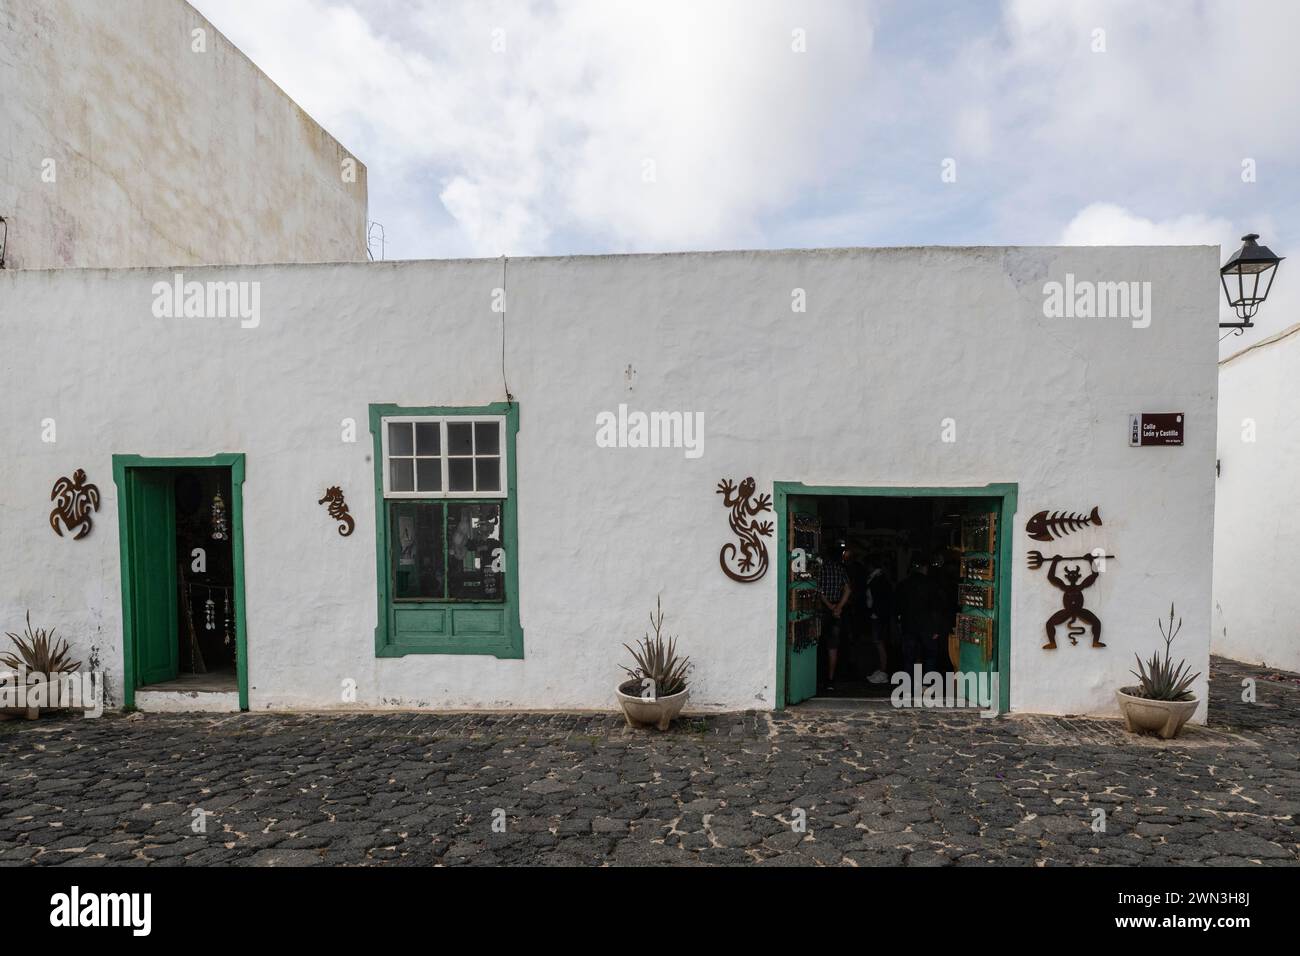 Metal sculptures on a house wall, Teseguite, Lanzarote, Canary Islands, Spain Stock Photo